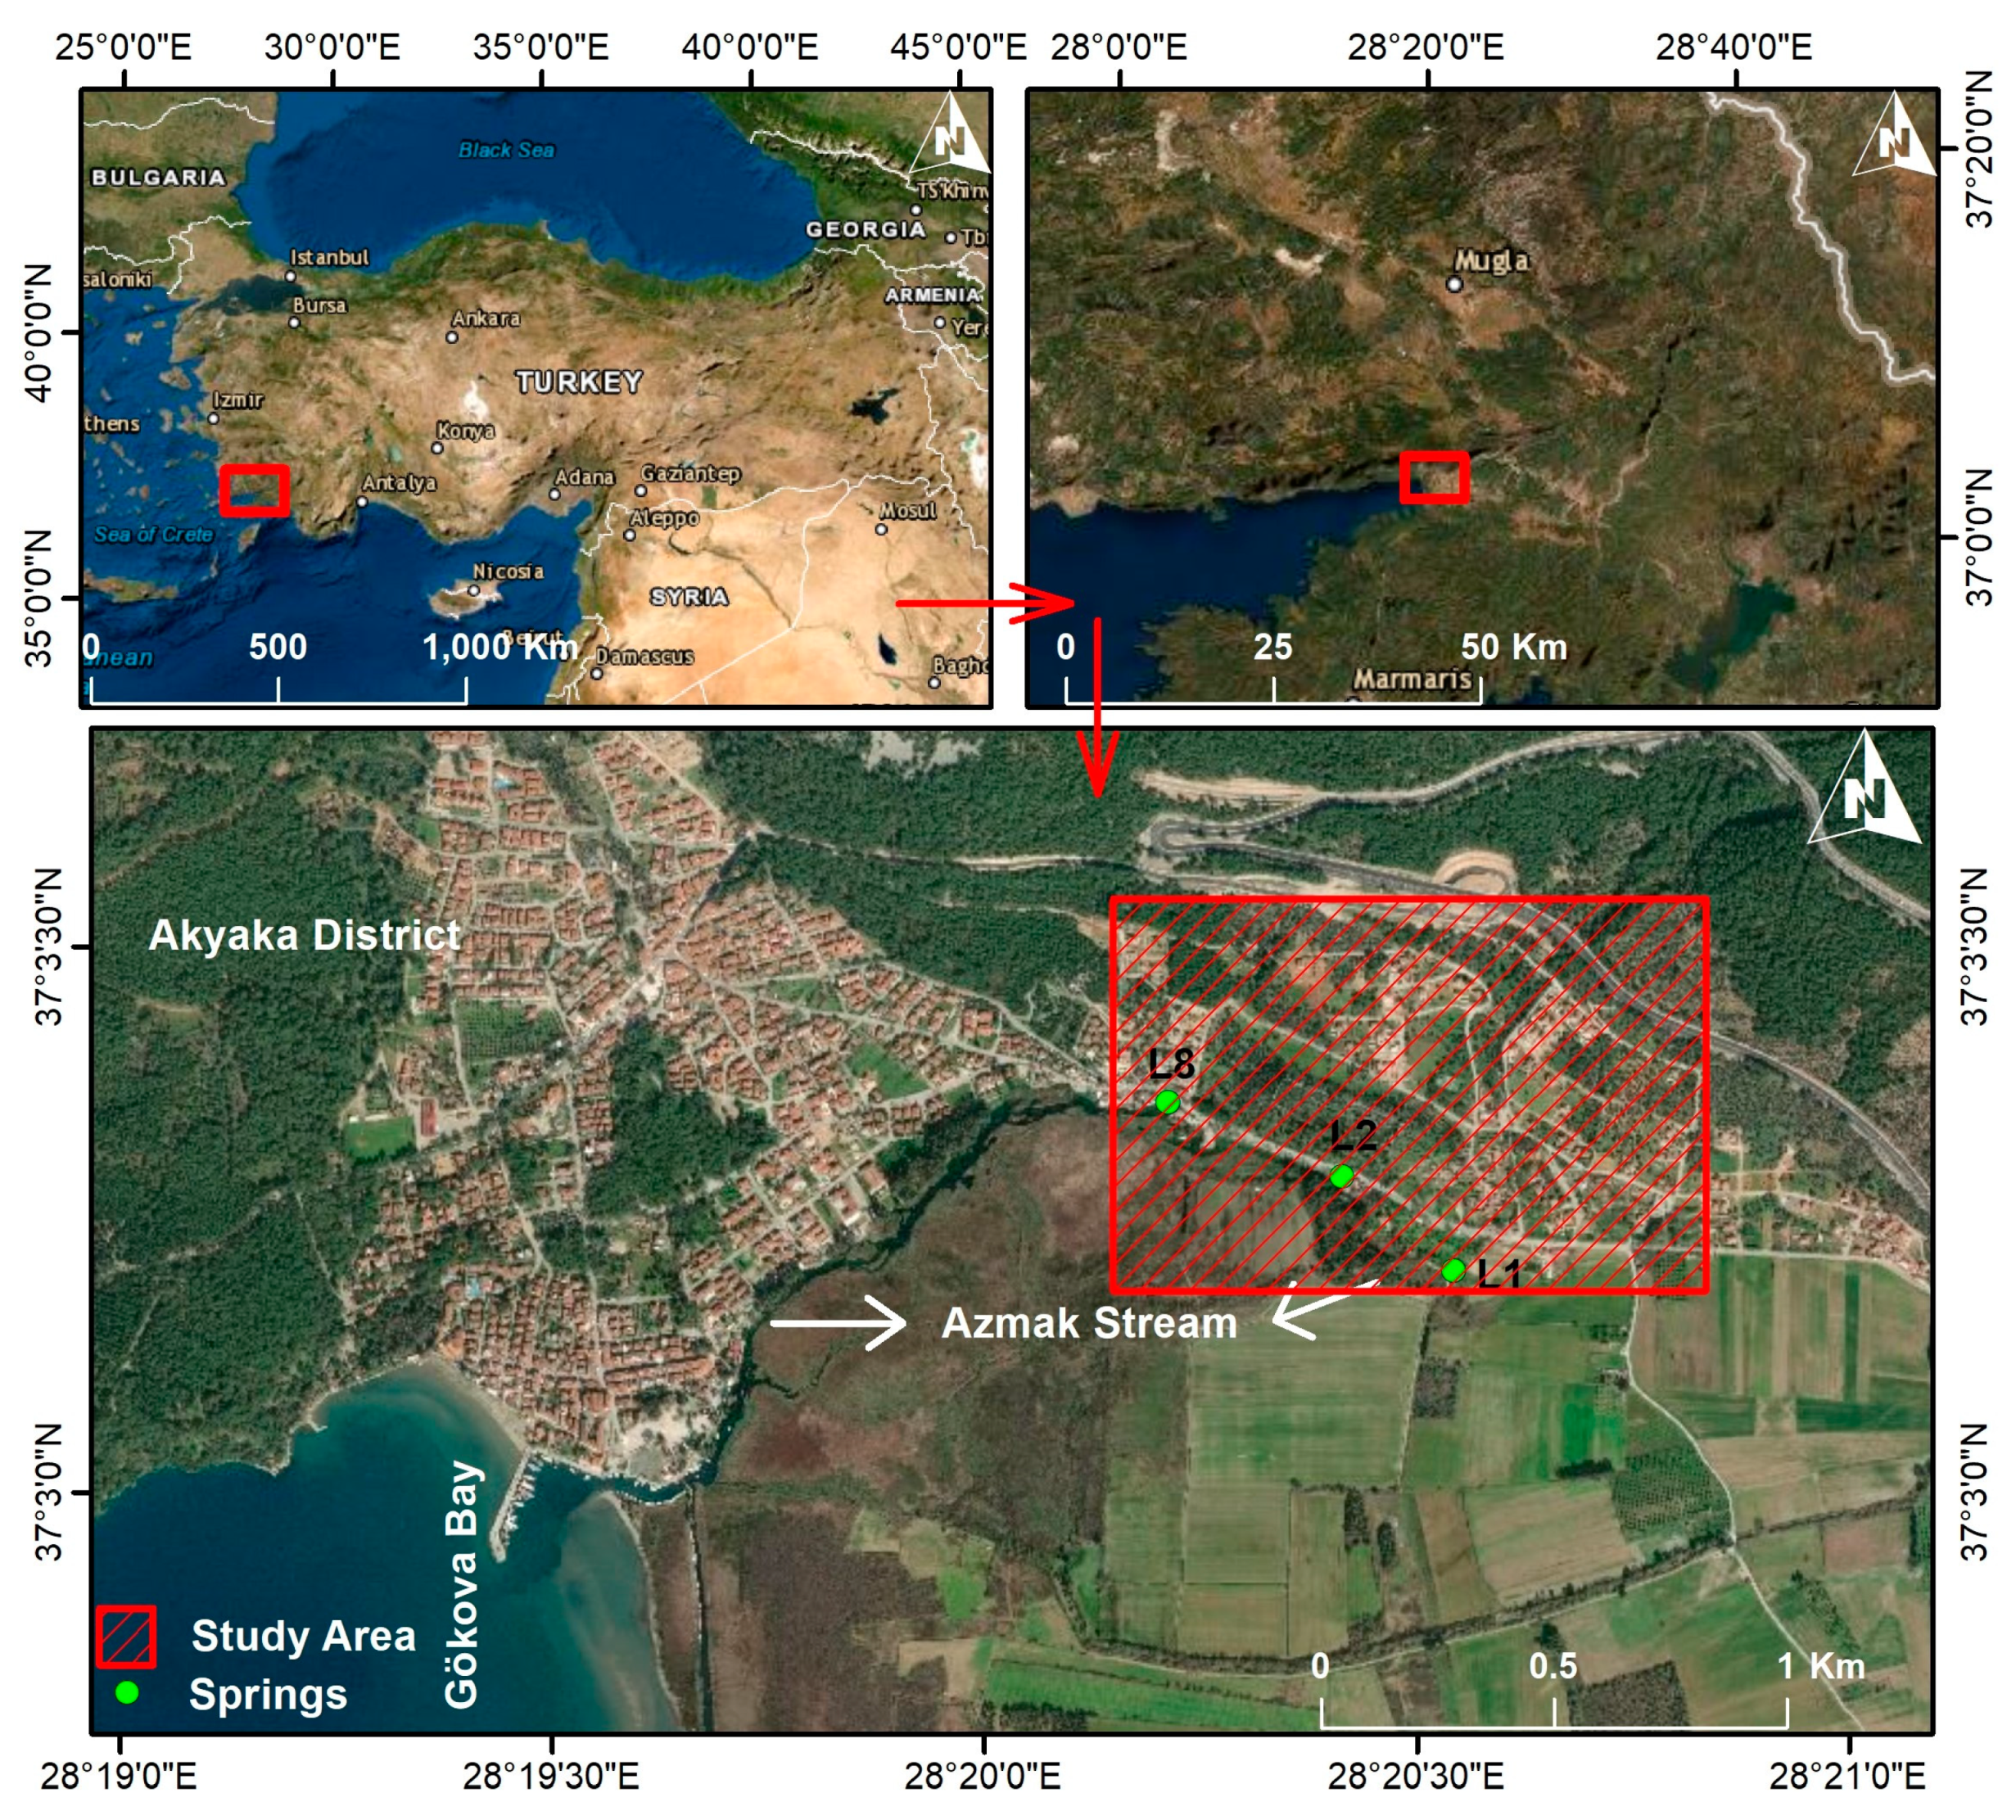 Water Free Full Text Investigating The Structure Of A Coastal Karstic Aquifer Through The Hydrogeological Characterization Of Springs Using Geophysical Methods And Field Investigation Gokova Bay Sw Turkey Html [ 2223 x 2462 Pixel ]